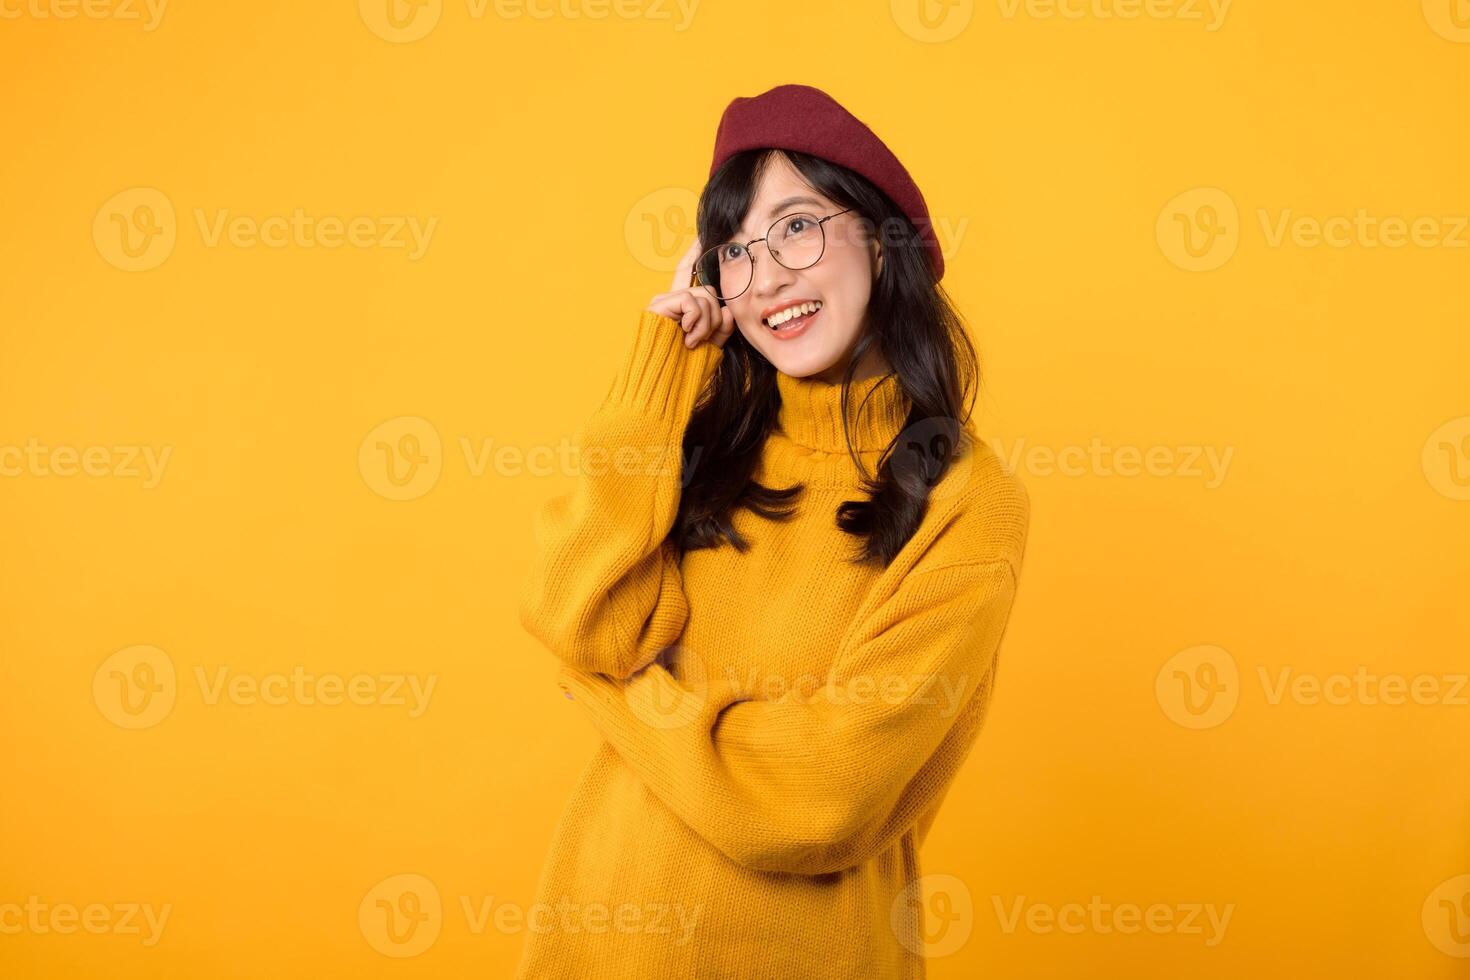 portrait attractive young 30s Asian woman beautiful model in artist look wearing yellow sweater and red hat isolated on yellow background. Thinking gesture body language concept. photo